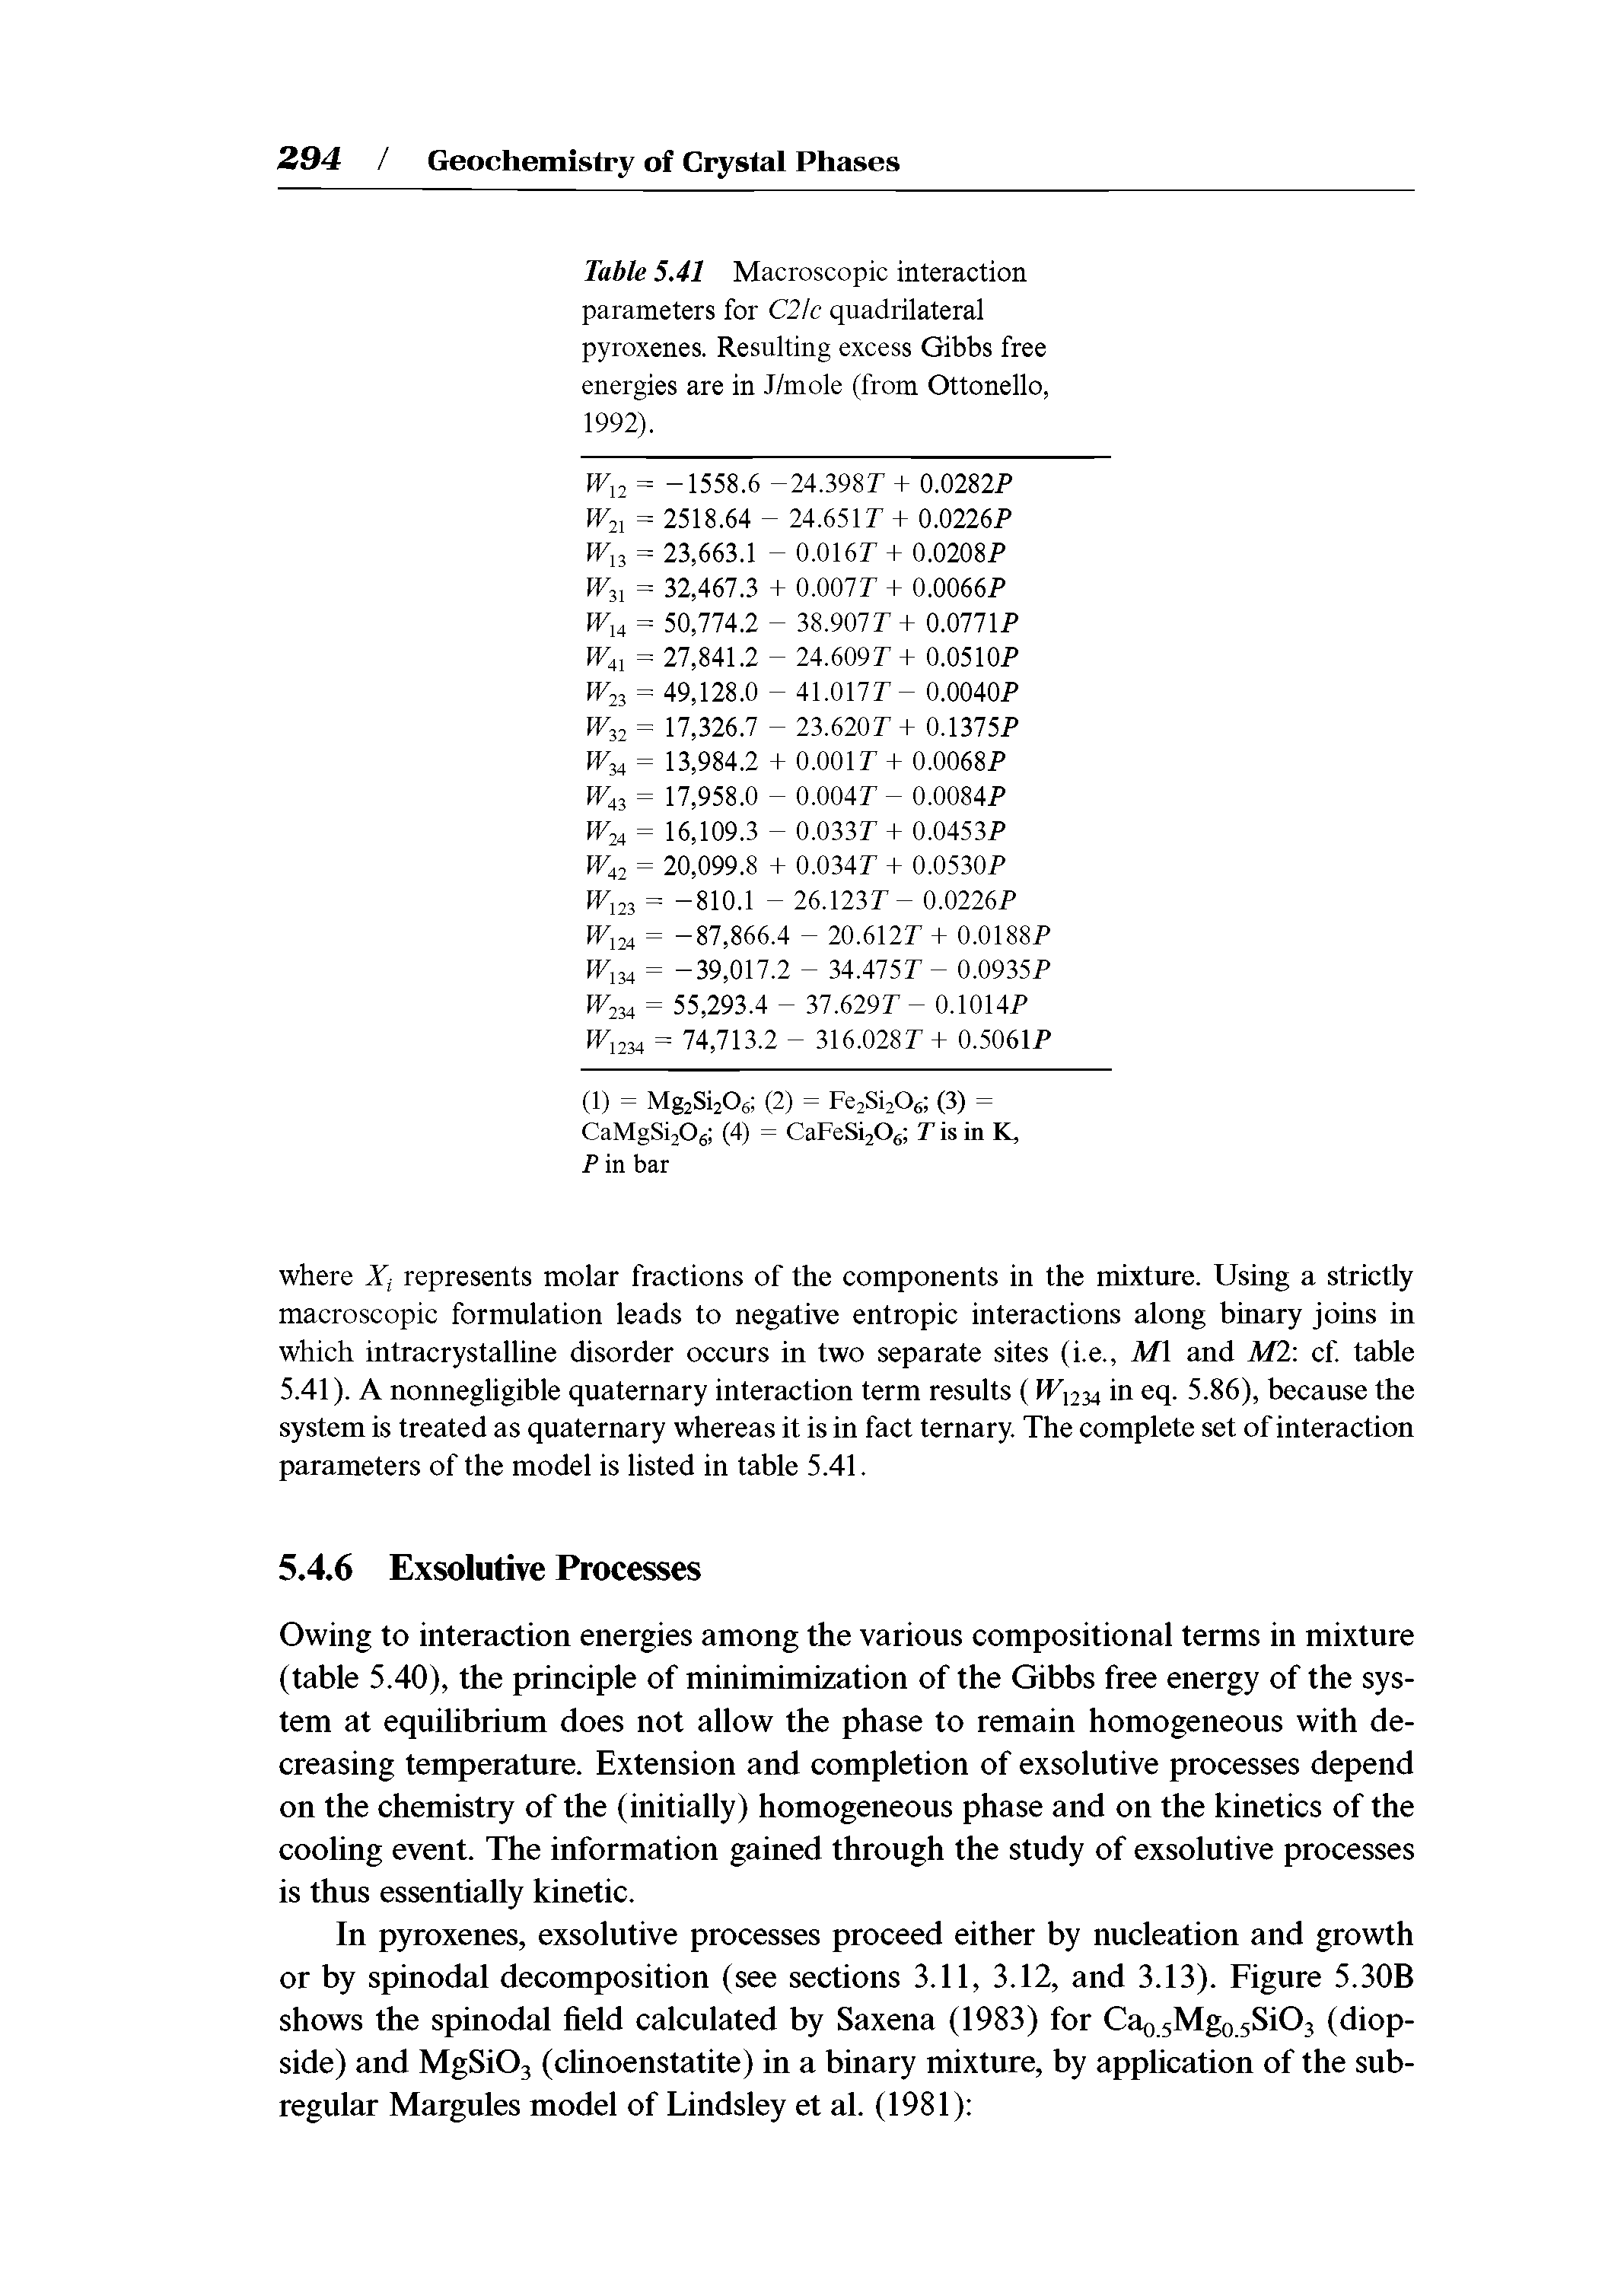 Table 5.41 Macroscopic interaction parameters for C2 c quadrilateral pyroxenes. Resulting excess Gibbs free energies are in J/mole (from Ottonello, 1992).